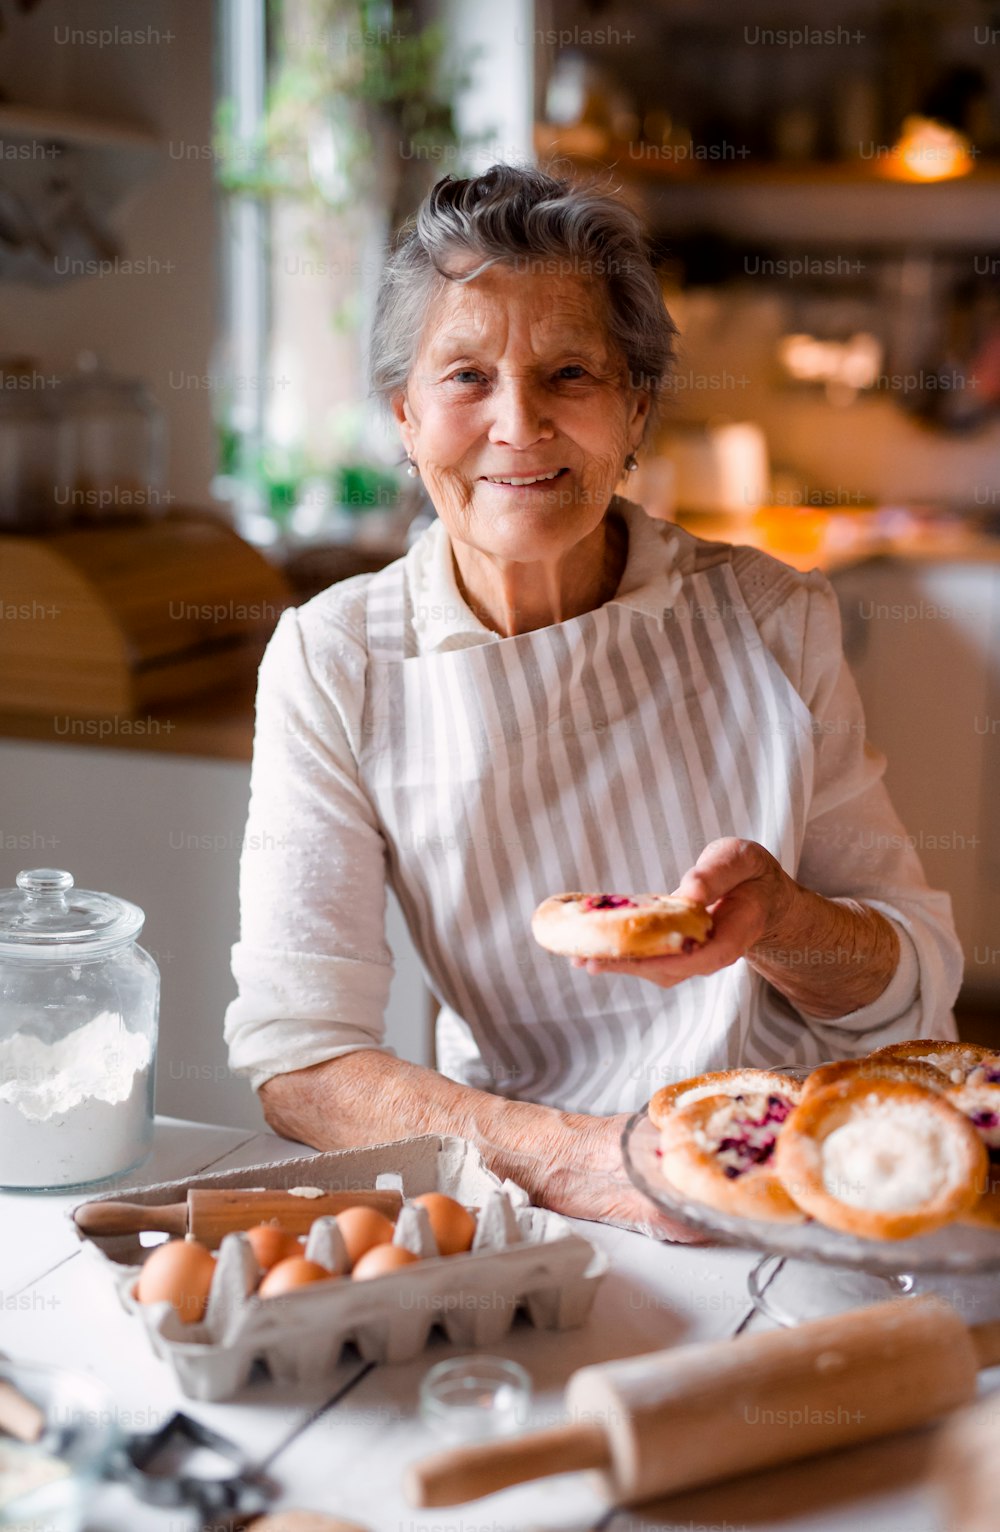 An elderly woman making cakes in a kitchen at home.